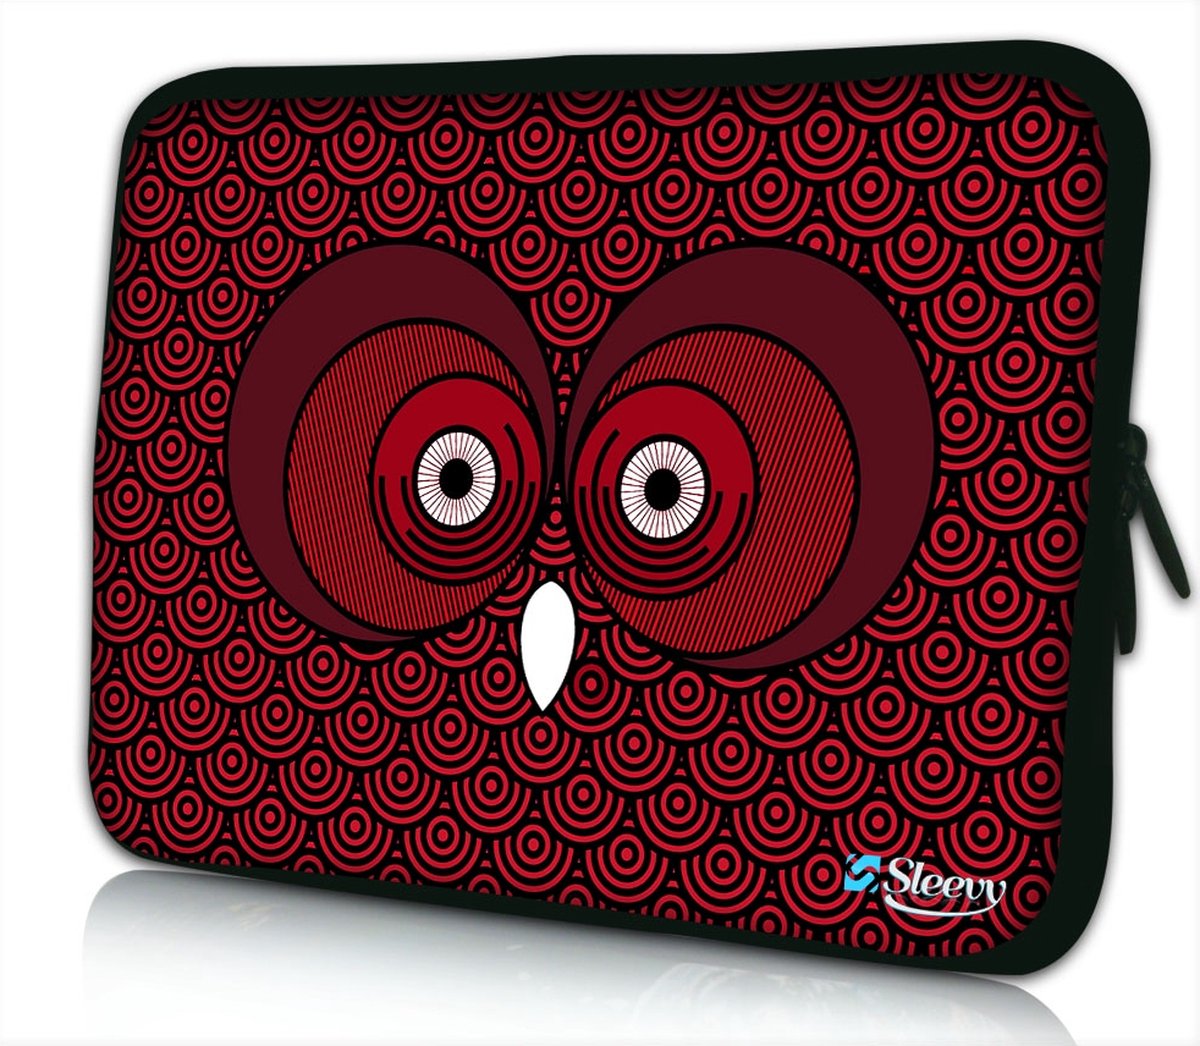 Sleevy 13.3 laptophoes rode uil - laptop sleeve - Sleevy collectie 300+ designs